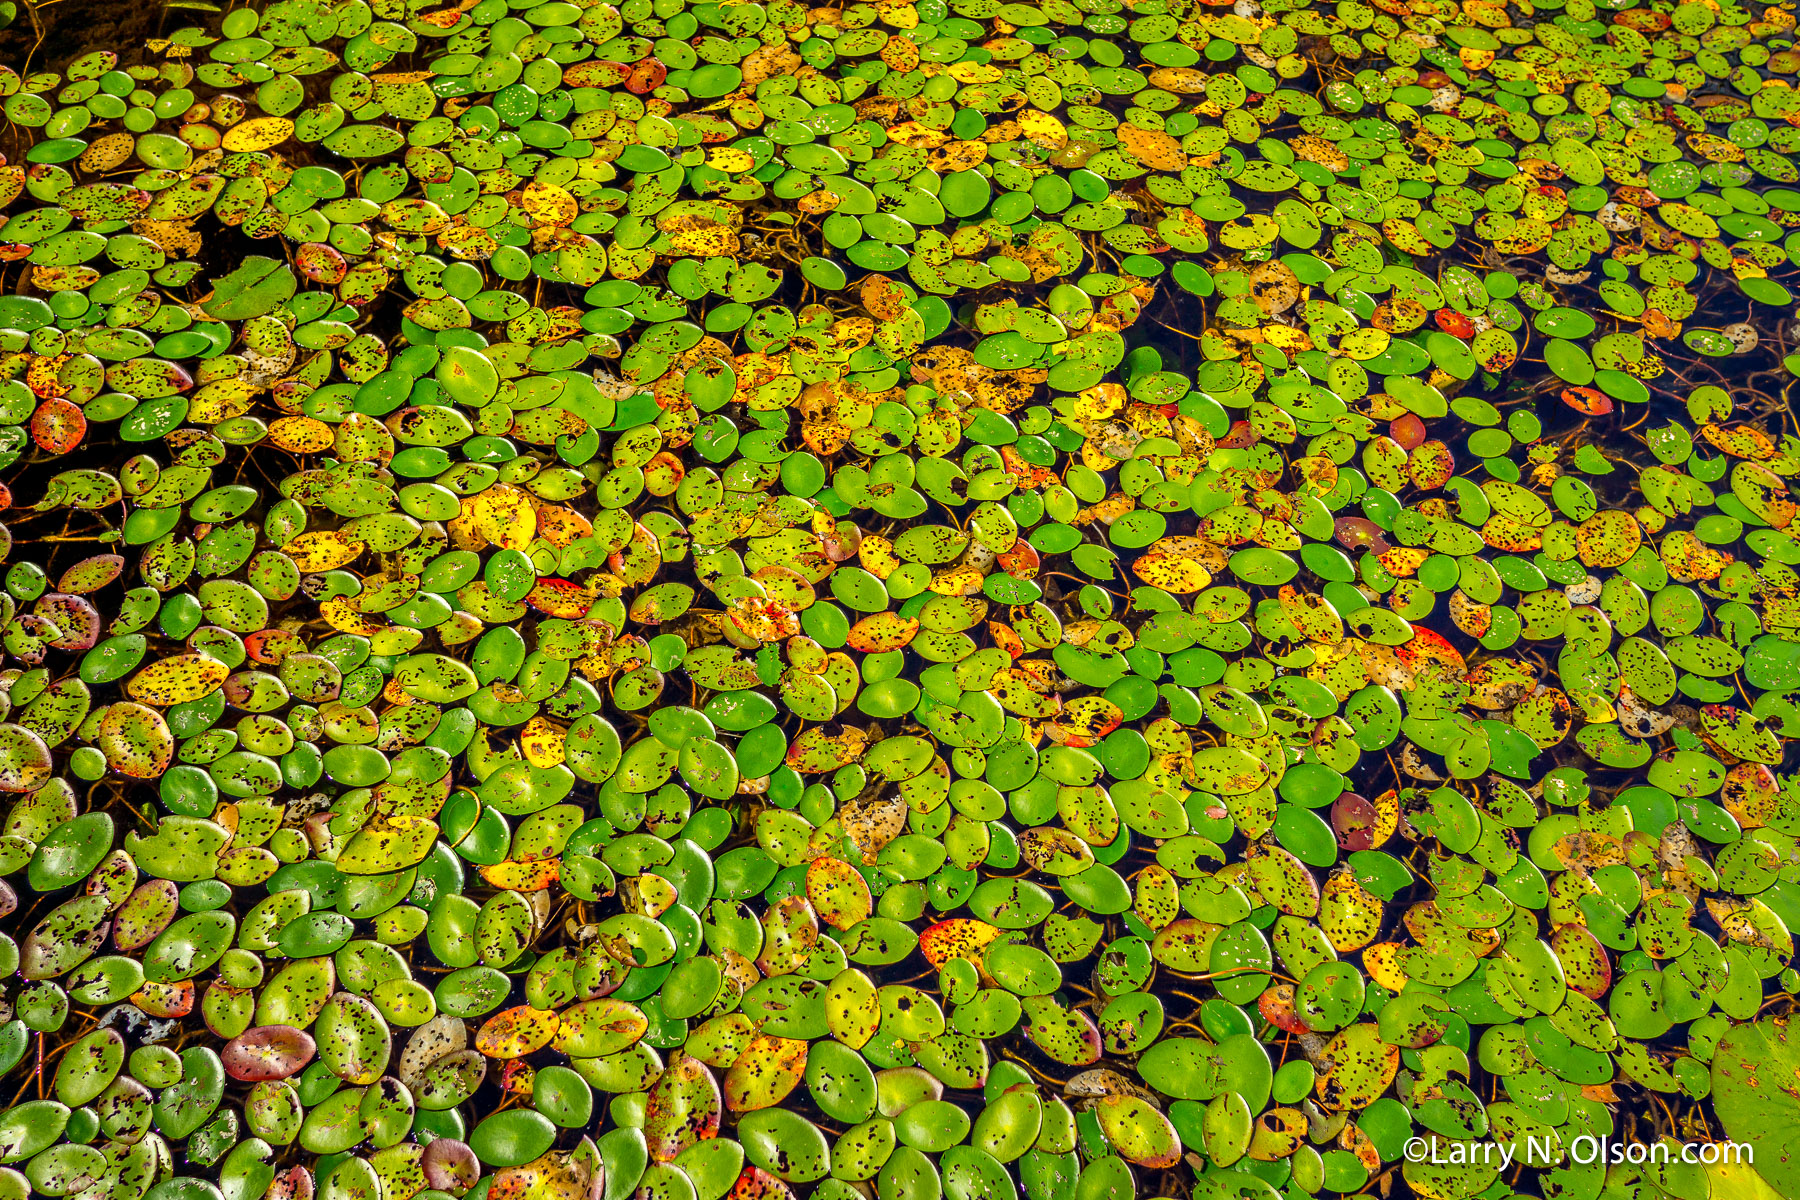 Water Lilies #4 , MN | A collection of water lilies in the Boundary Waters Canoe Area of Minnesota begins to change color as fall approaches.